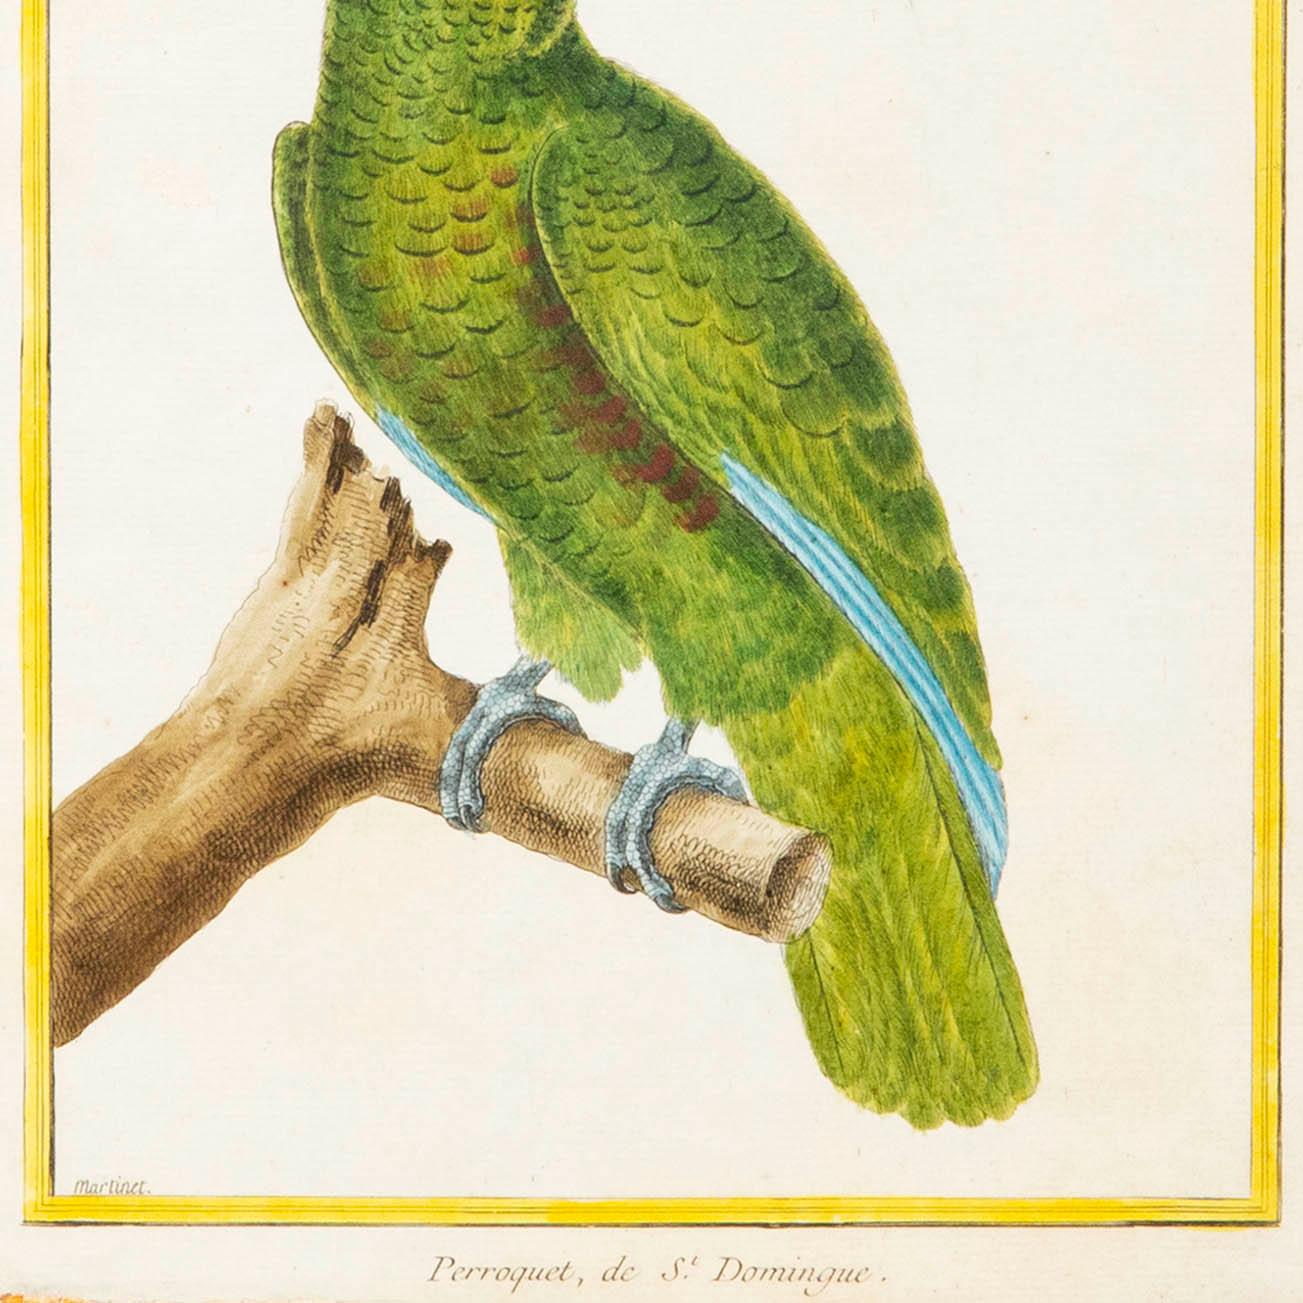 A very decorative engravings of a parrot, by François Nicolas Martinet, from Histoire Naturelle des Oiseaux, 1770–1786.
France, circa 1770–80.

Why we like it
Exquisitely engraved and hand-coloured in the 18th century, it evokes the fashion for